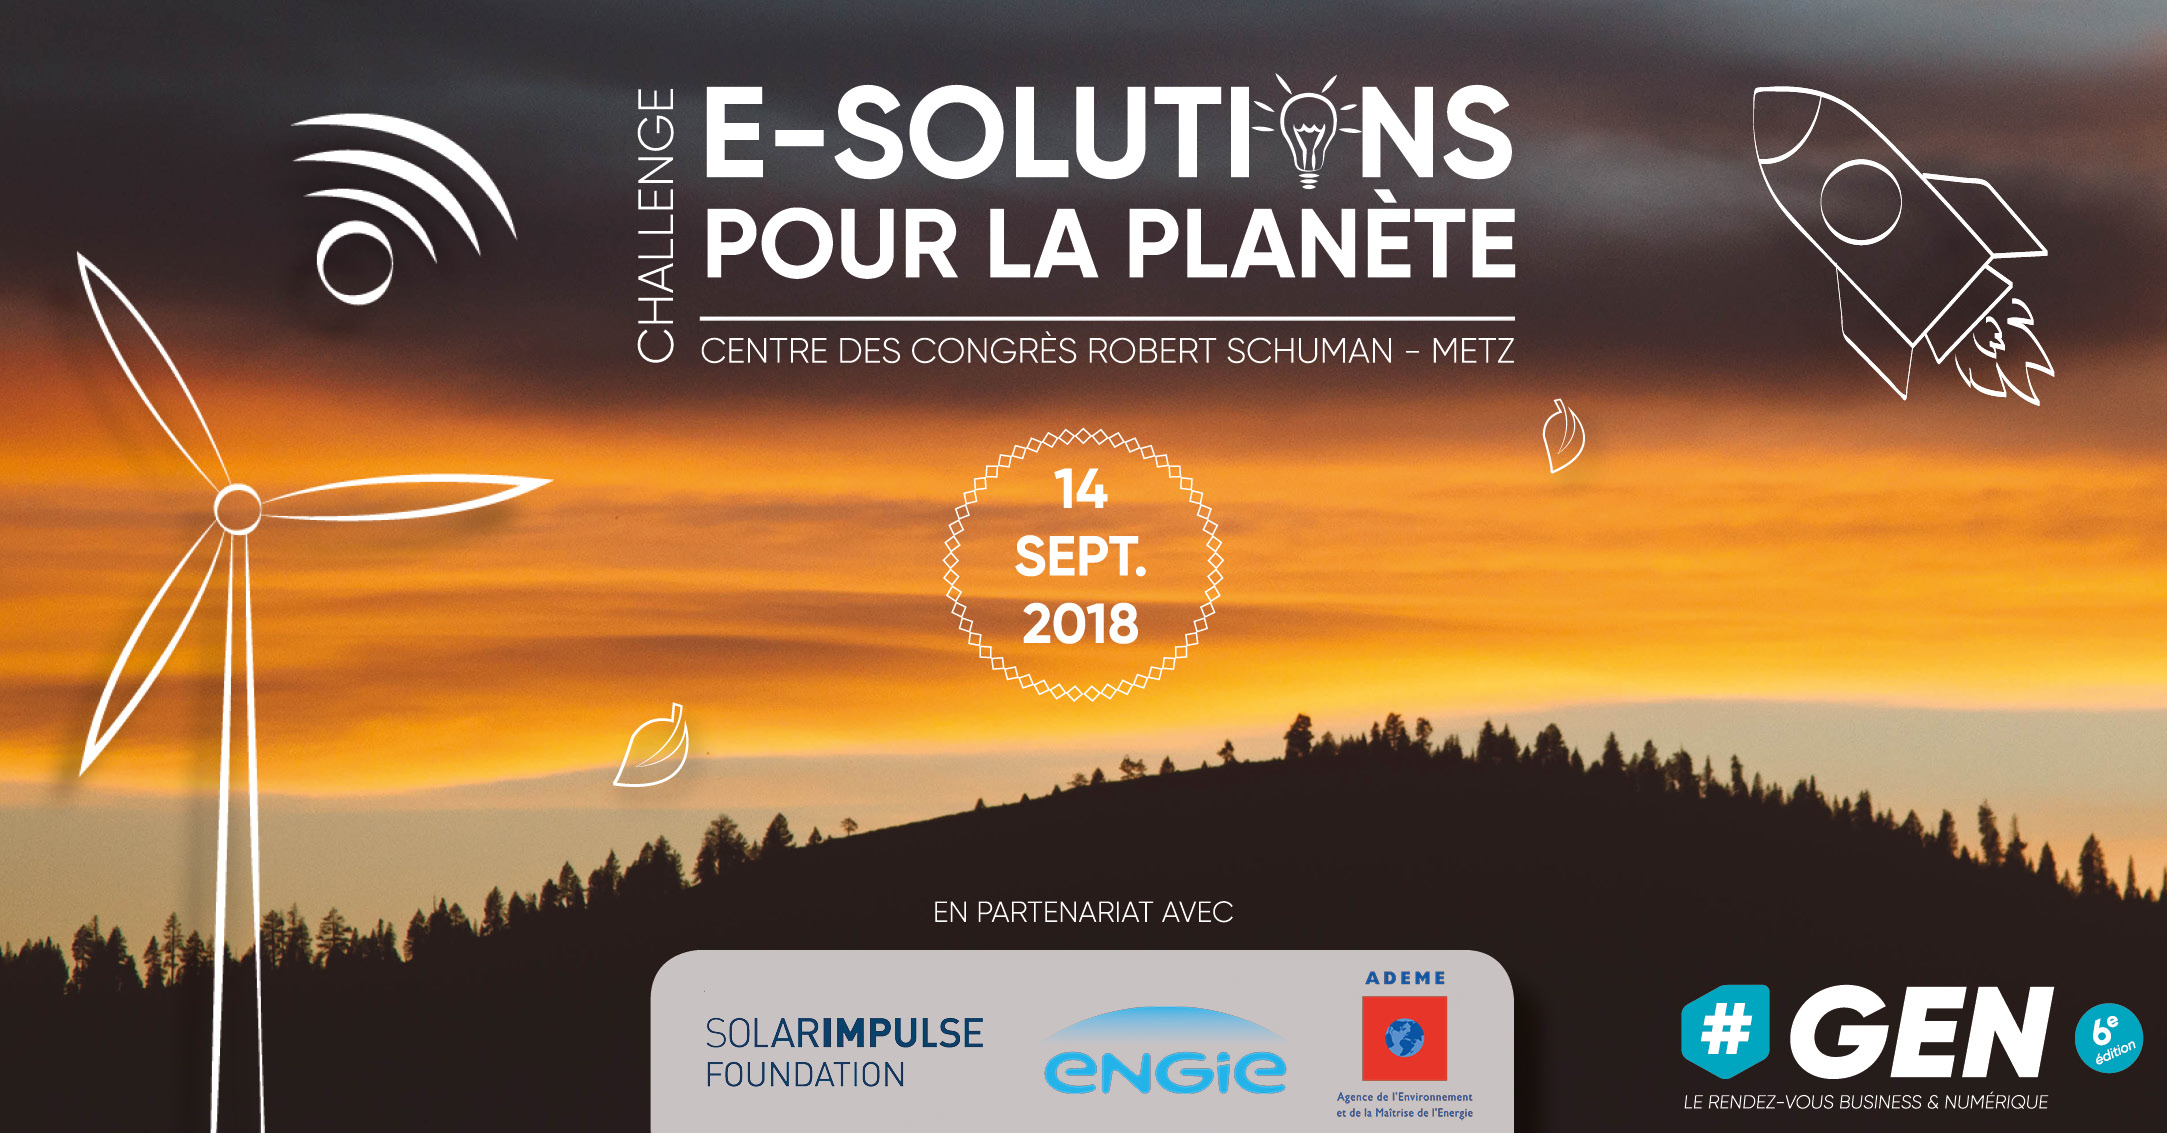 E-solutions challenge for the planet